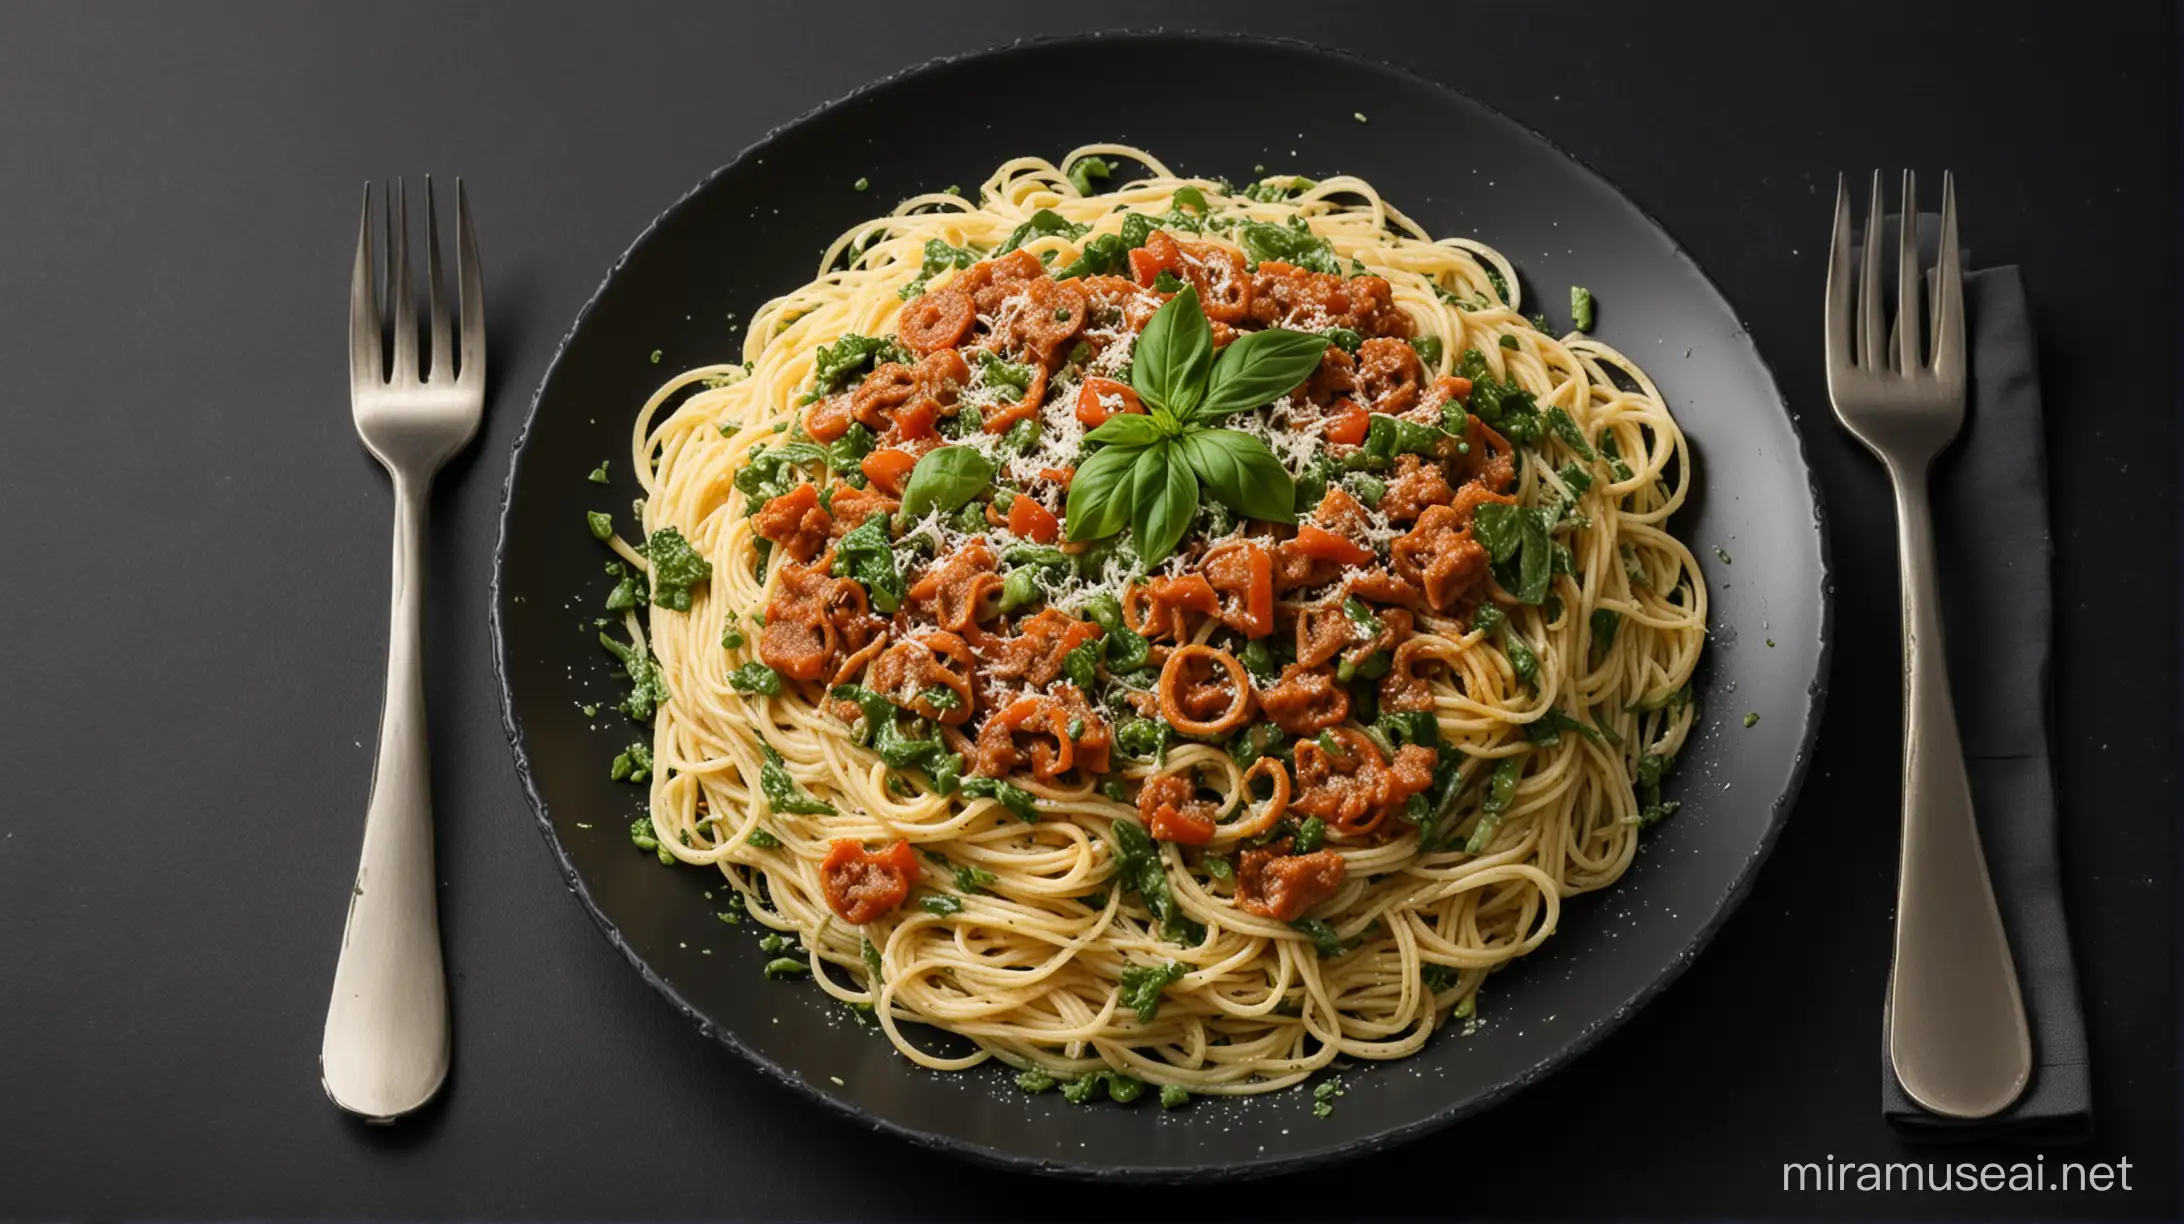 Savory Spaghetti Dish with Vibrant Green Accents on a Dramatic Black Background